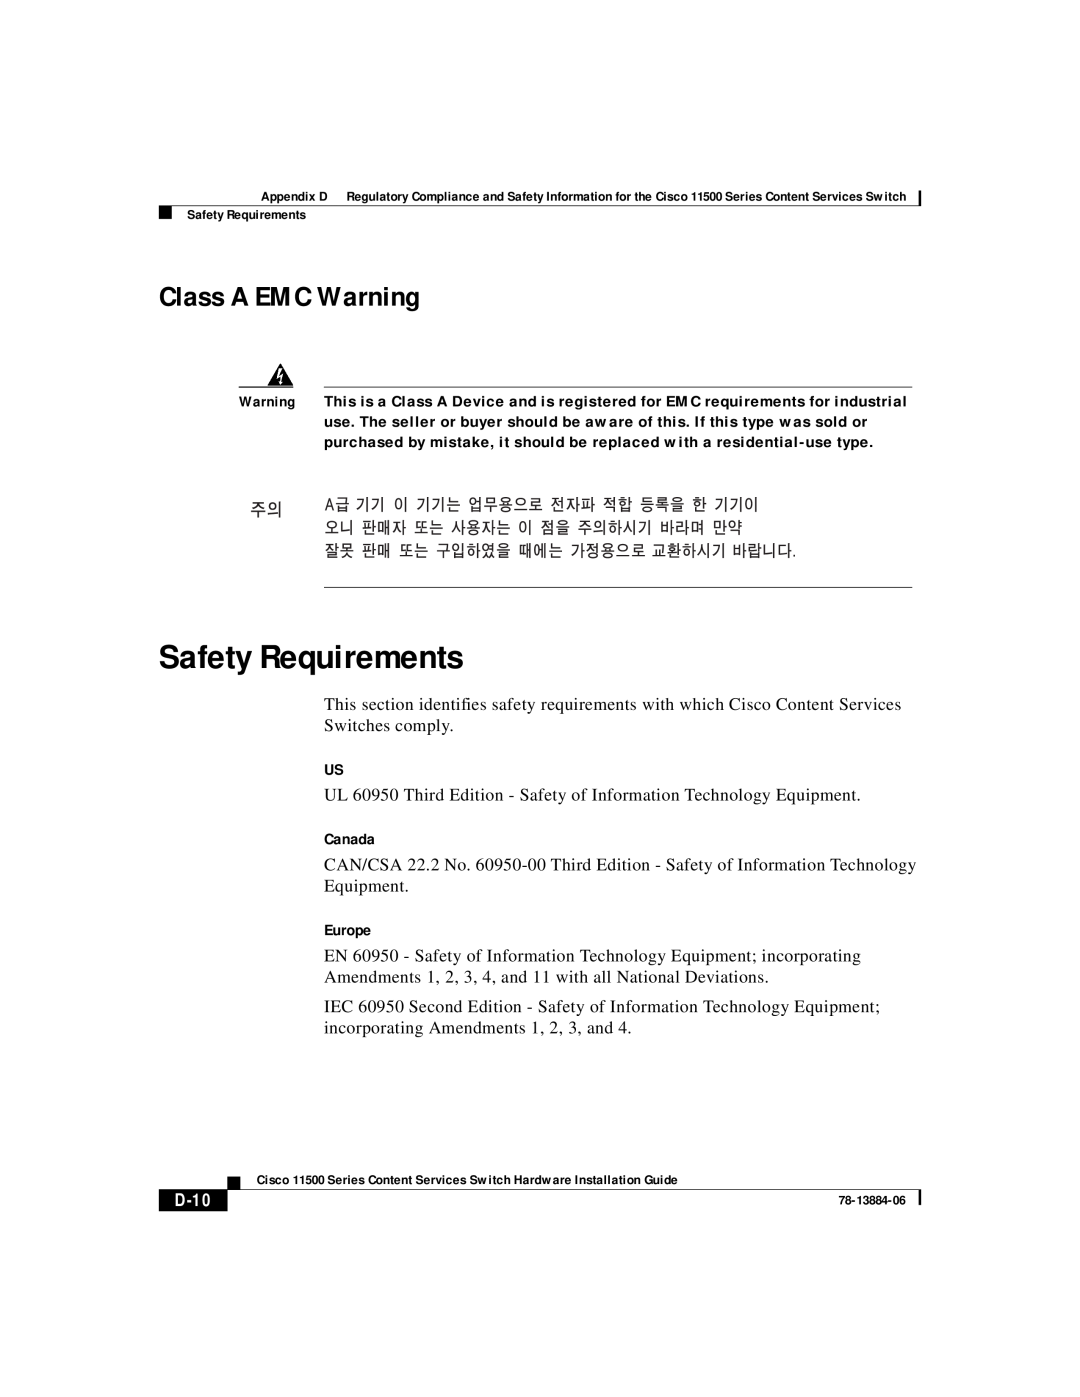 Cisco Systems 11501, 11506, 11503, 11500 appendix Safety Requirements, Class A EMC Warning, D-10 